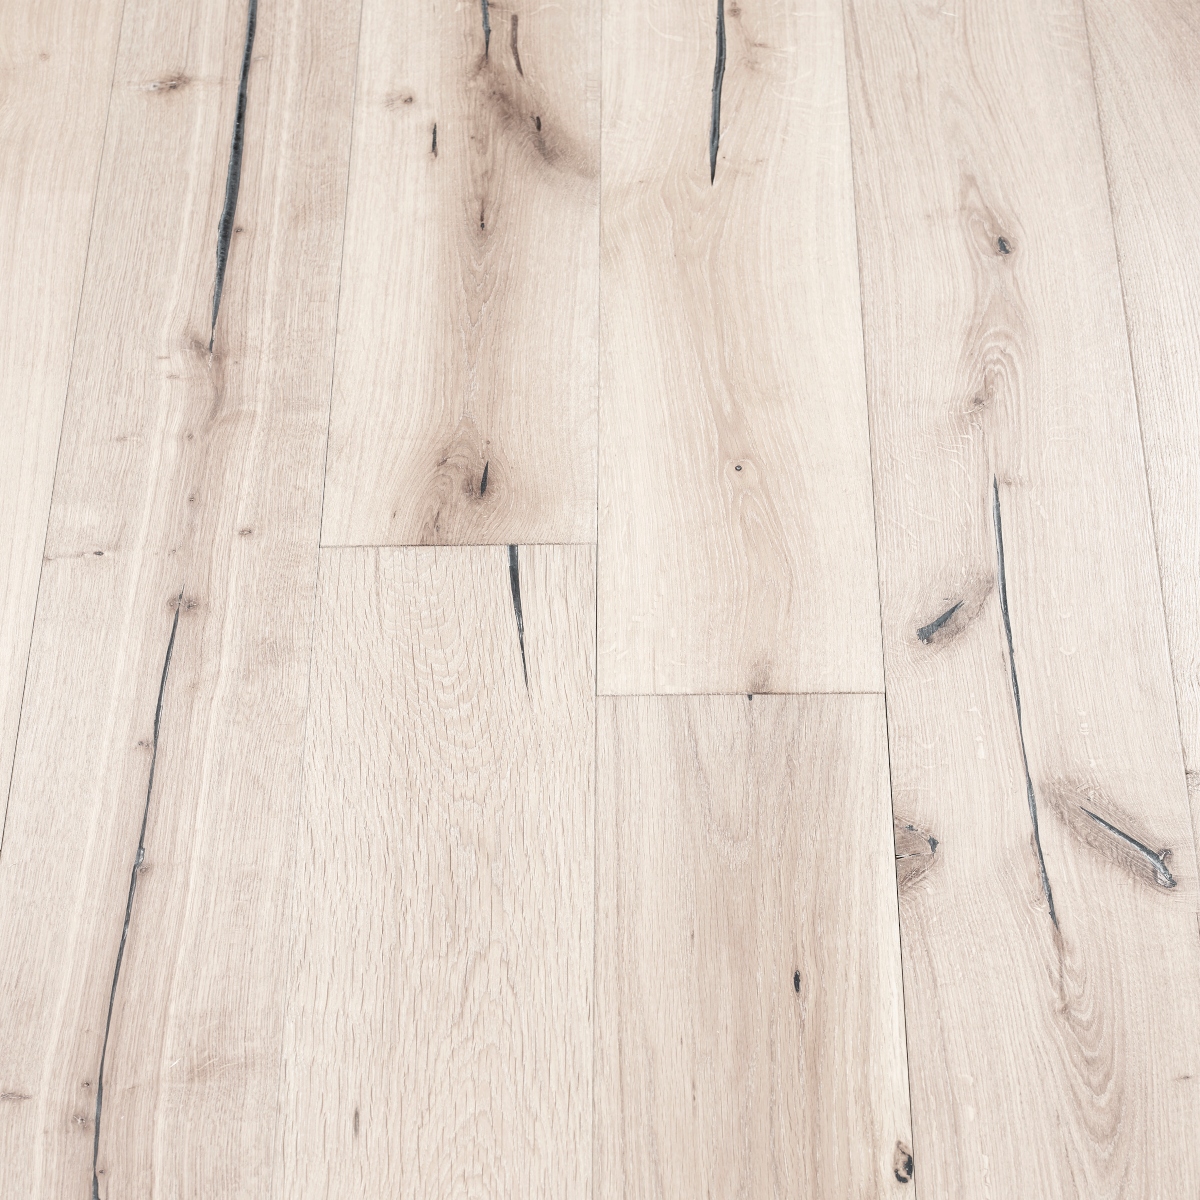 Distressed Snow WoodFlooring - image featuring distressed snow-white wood flooring with a weathered finish, creating a shabby-chic and vintage-inspired look.